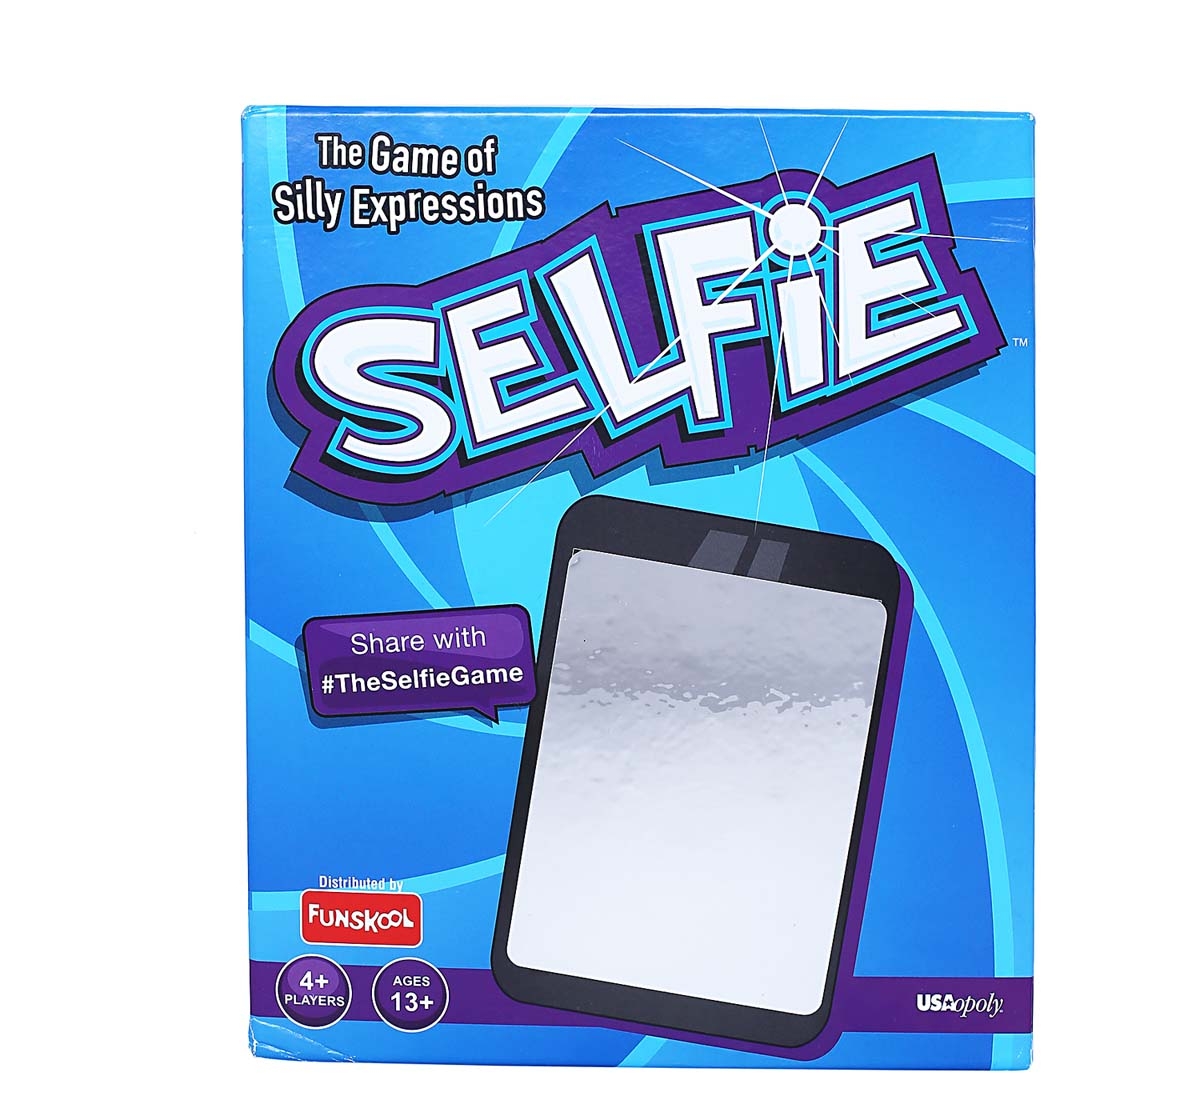 Funskool | Funskool Selfie - The Game of Silly Expressions Board Games for Kids age 13Y+ 